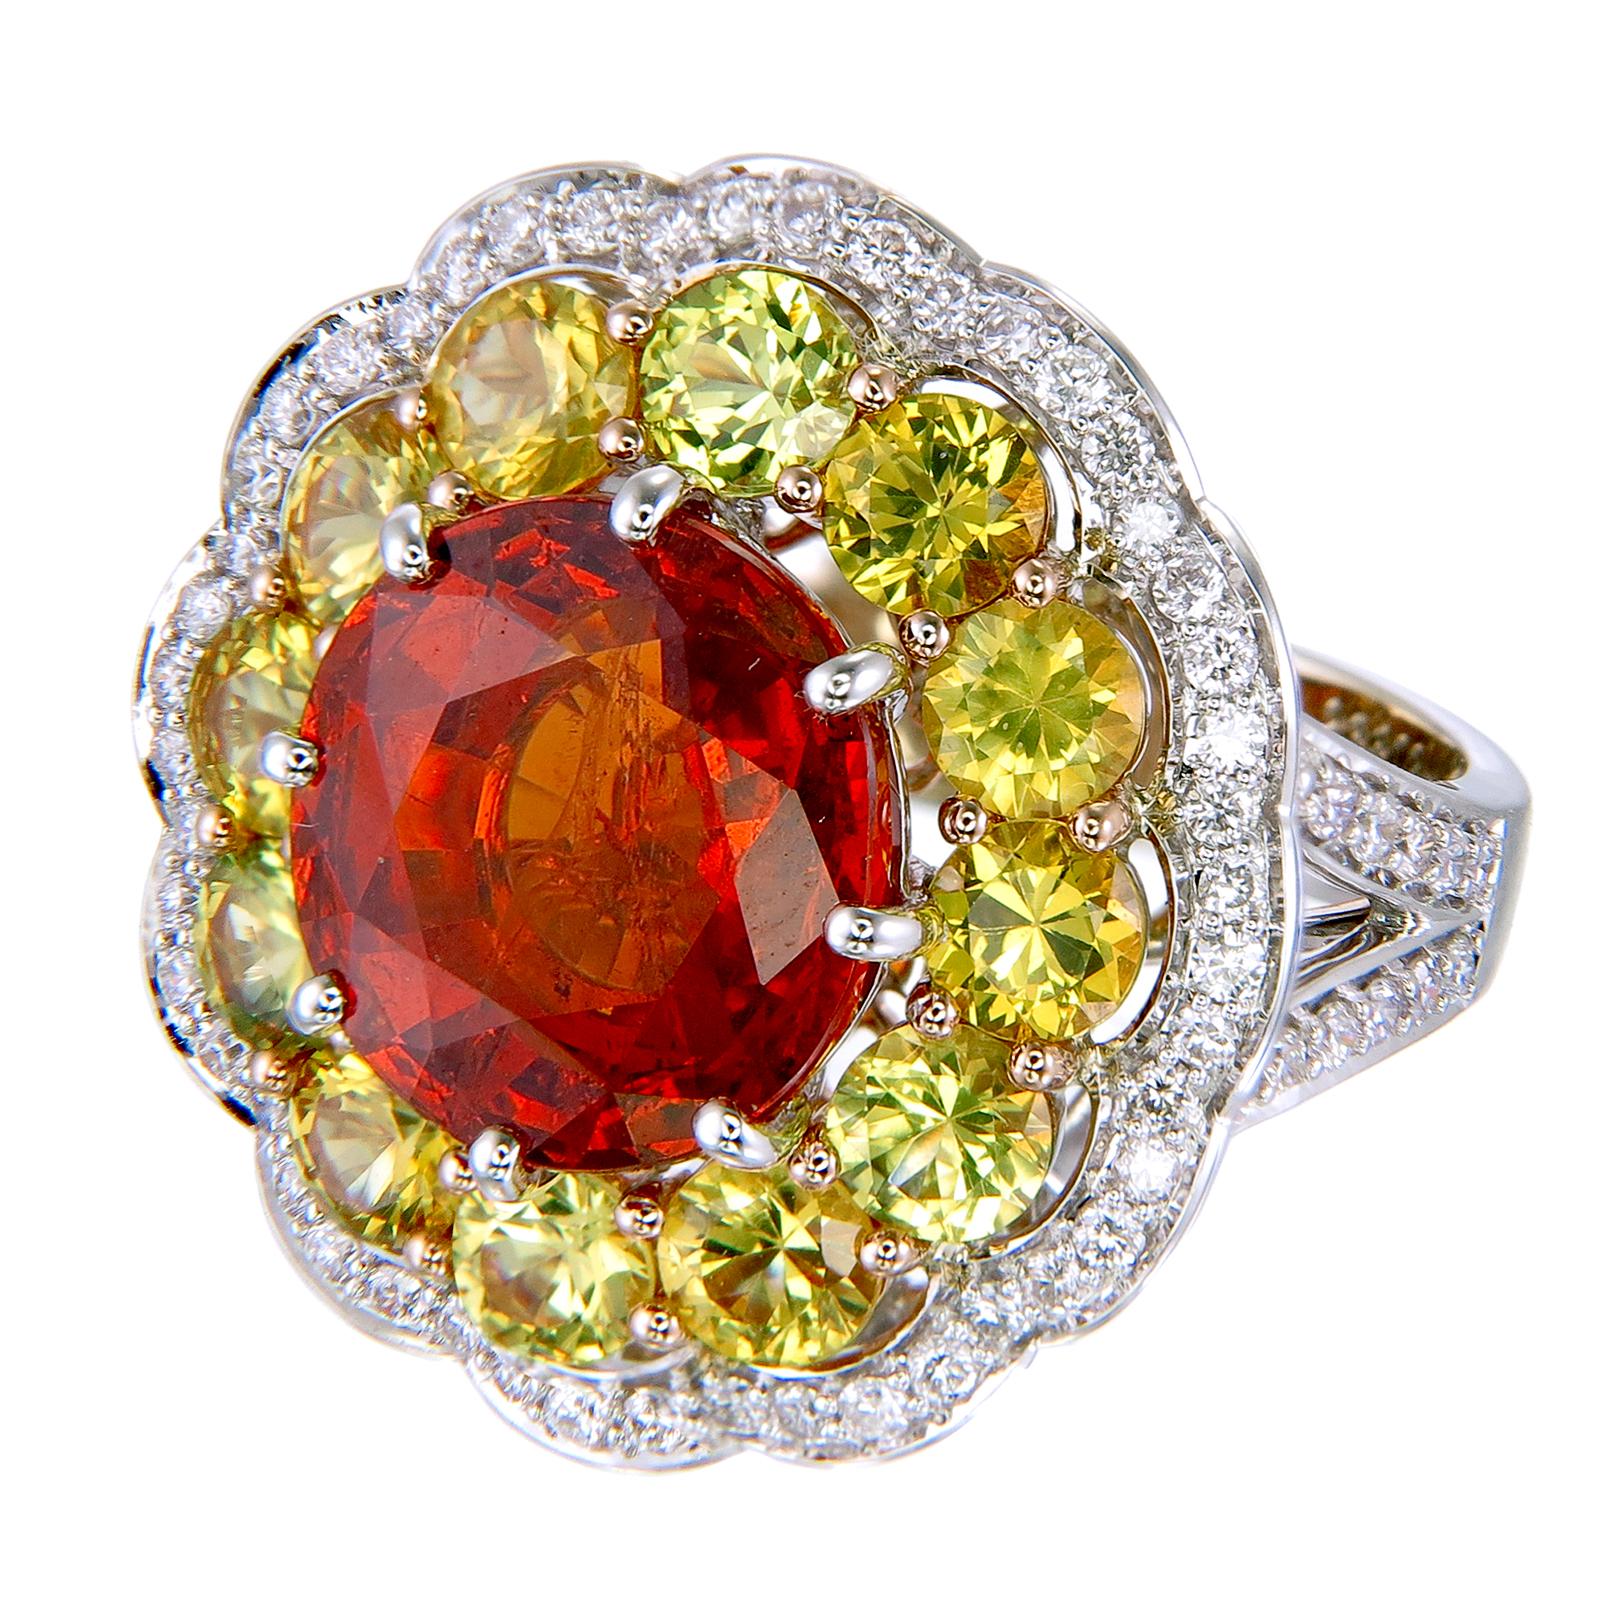 Bright colors and multiple spinning motifs create an energizing and fun jewel that can make any day brighter. An 8.38-carat round Spessartite Garnet is surrounded by a row of round 3.40-carat Yellow Sapphires which is surrounded by round 0.63-carat